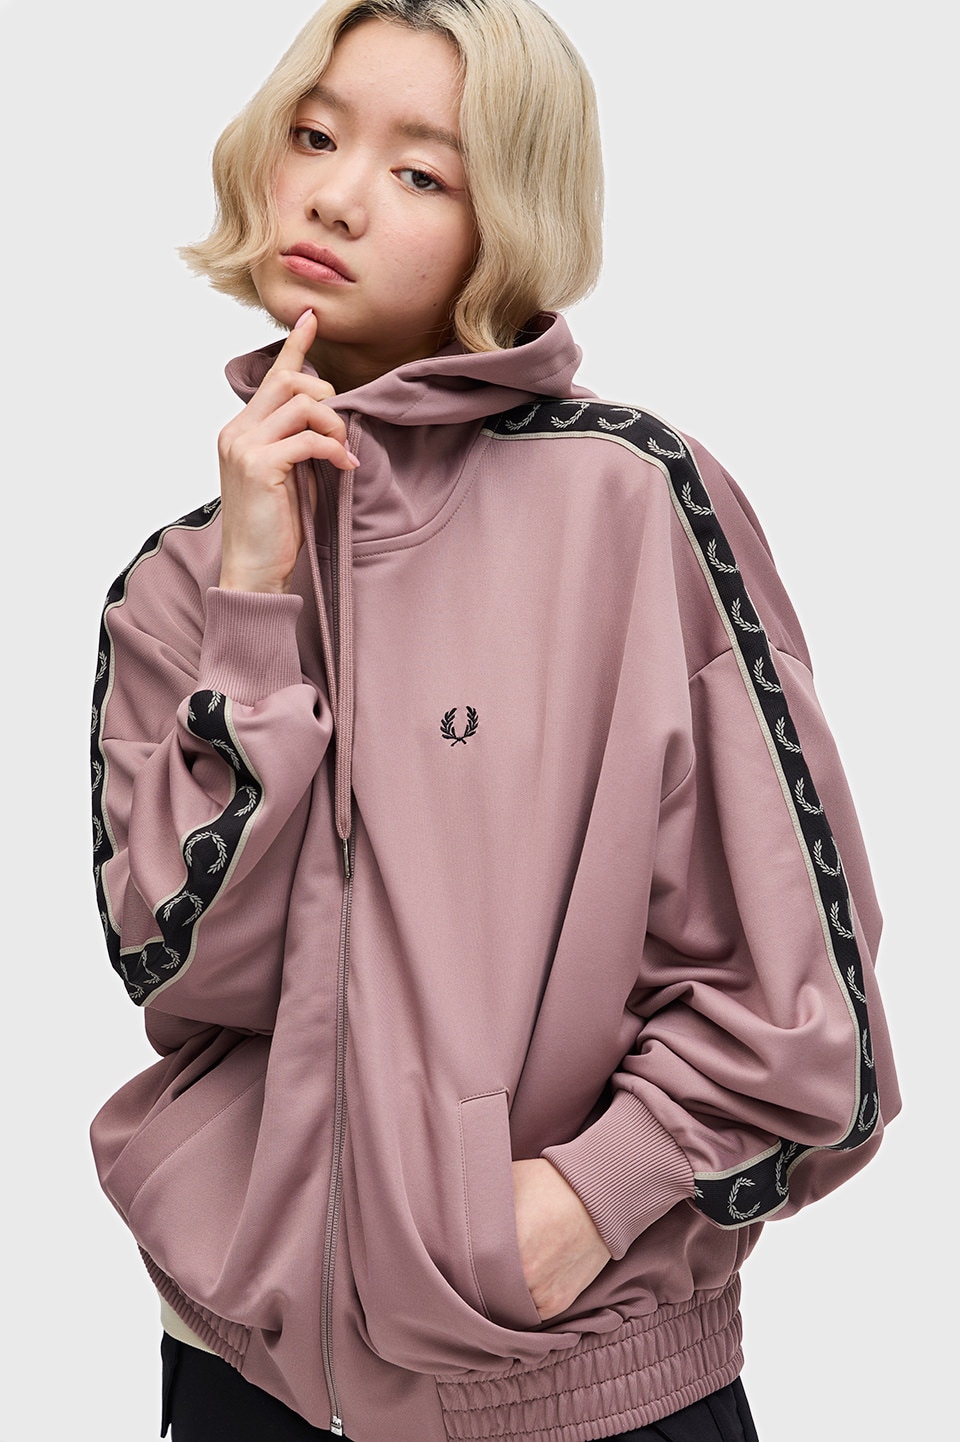 Taped Hooded Track Jacket |FRED PERRY(フレッドペリー)の通販 